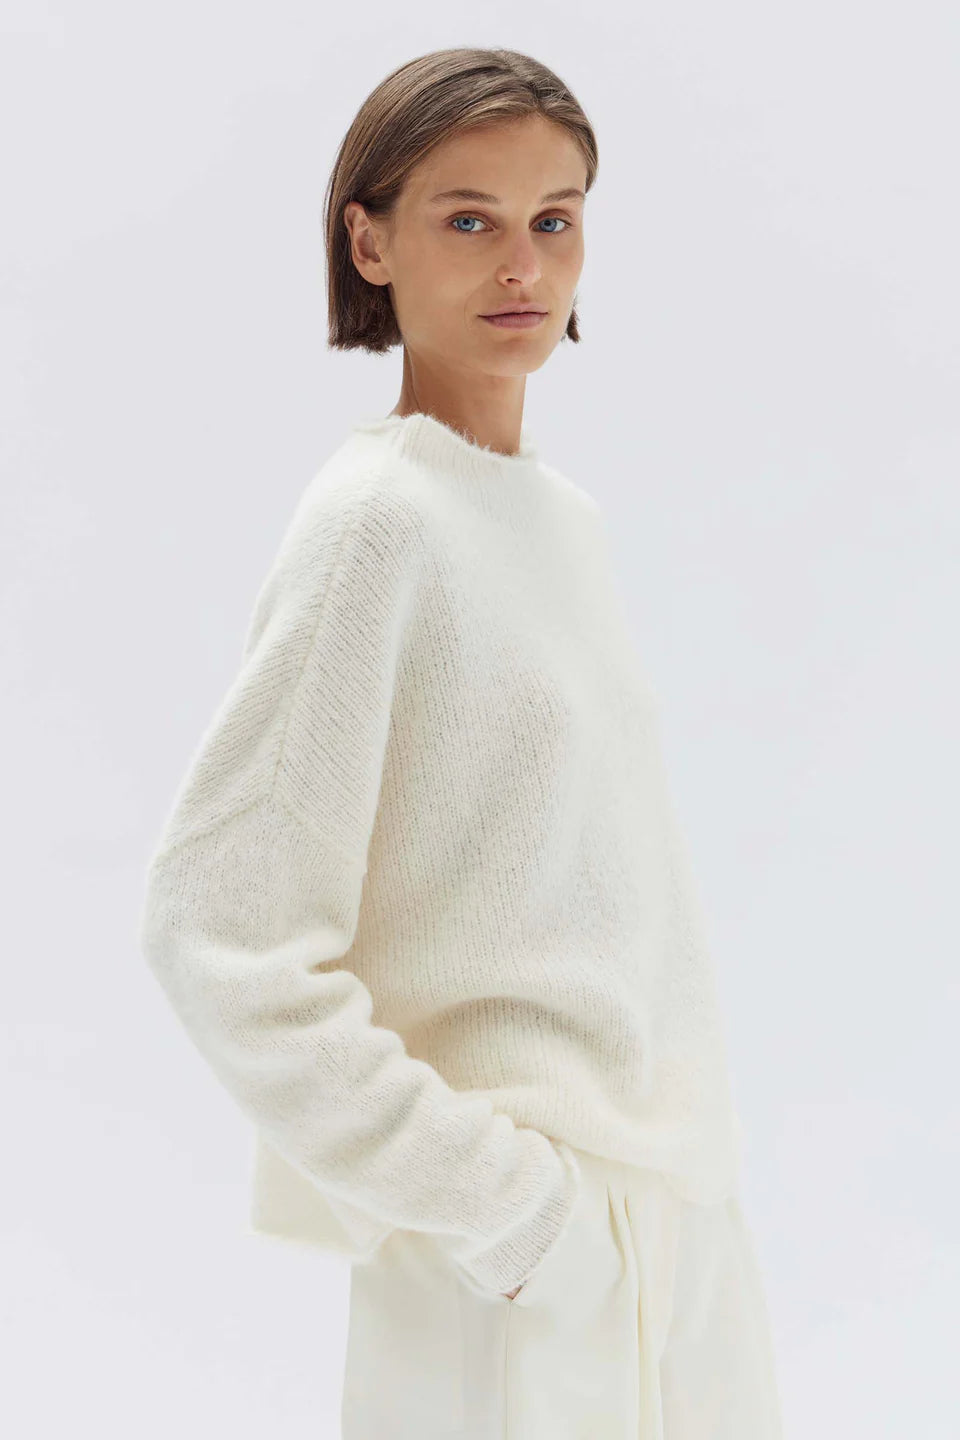 ASSEMBLY LABEL - APOLLINE KNIT - CREAM